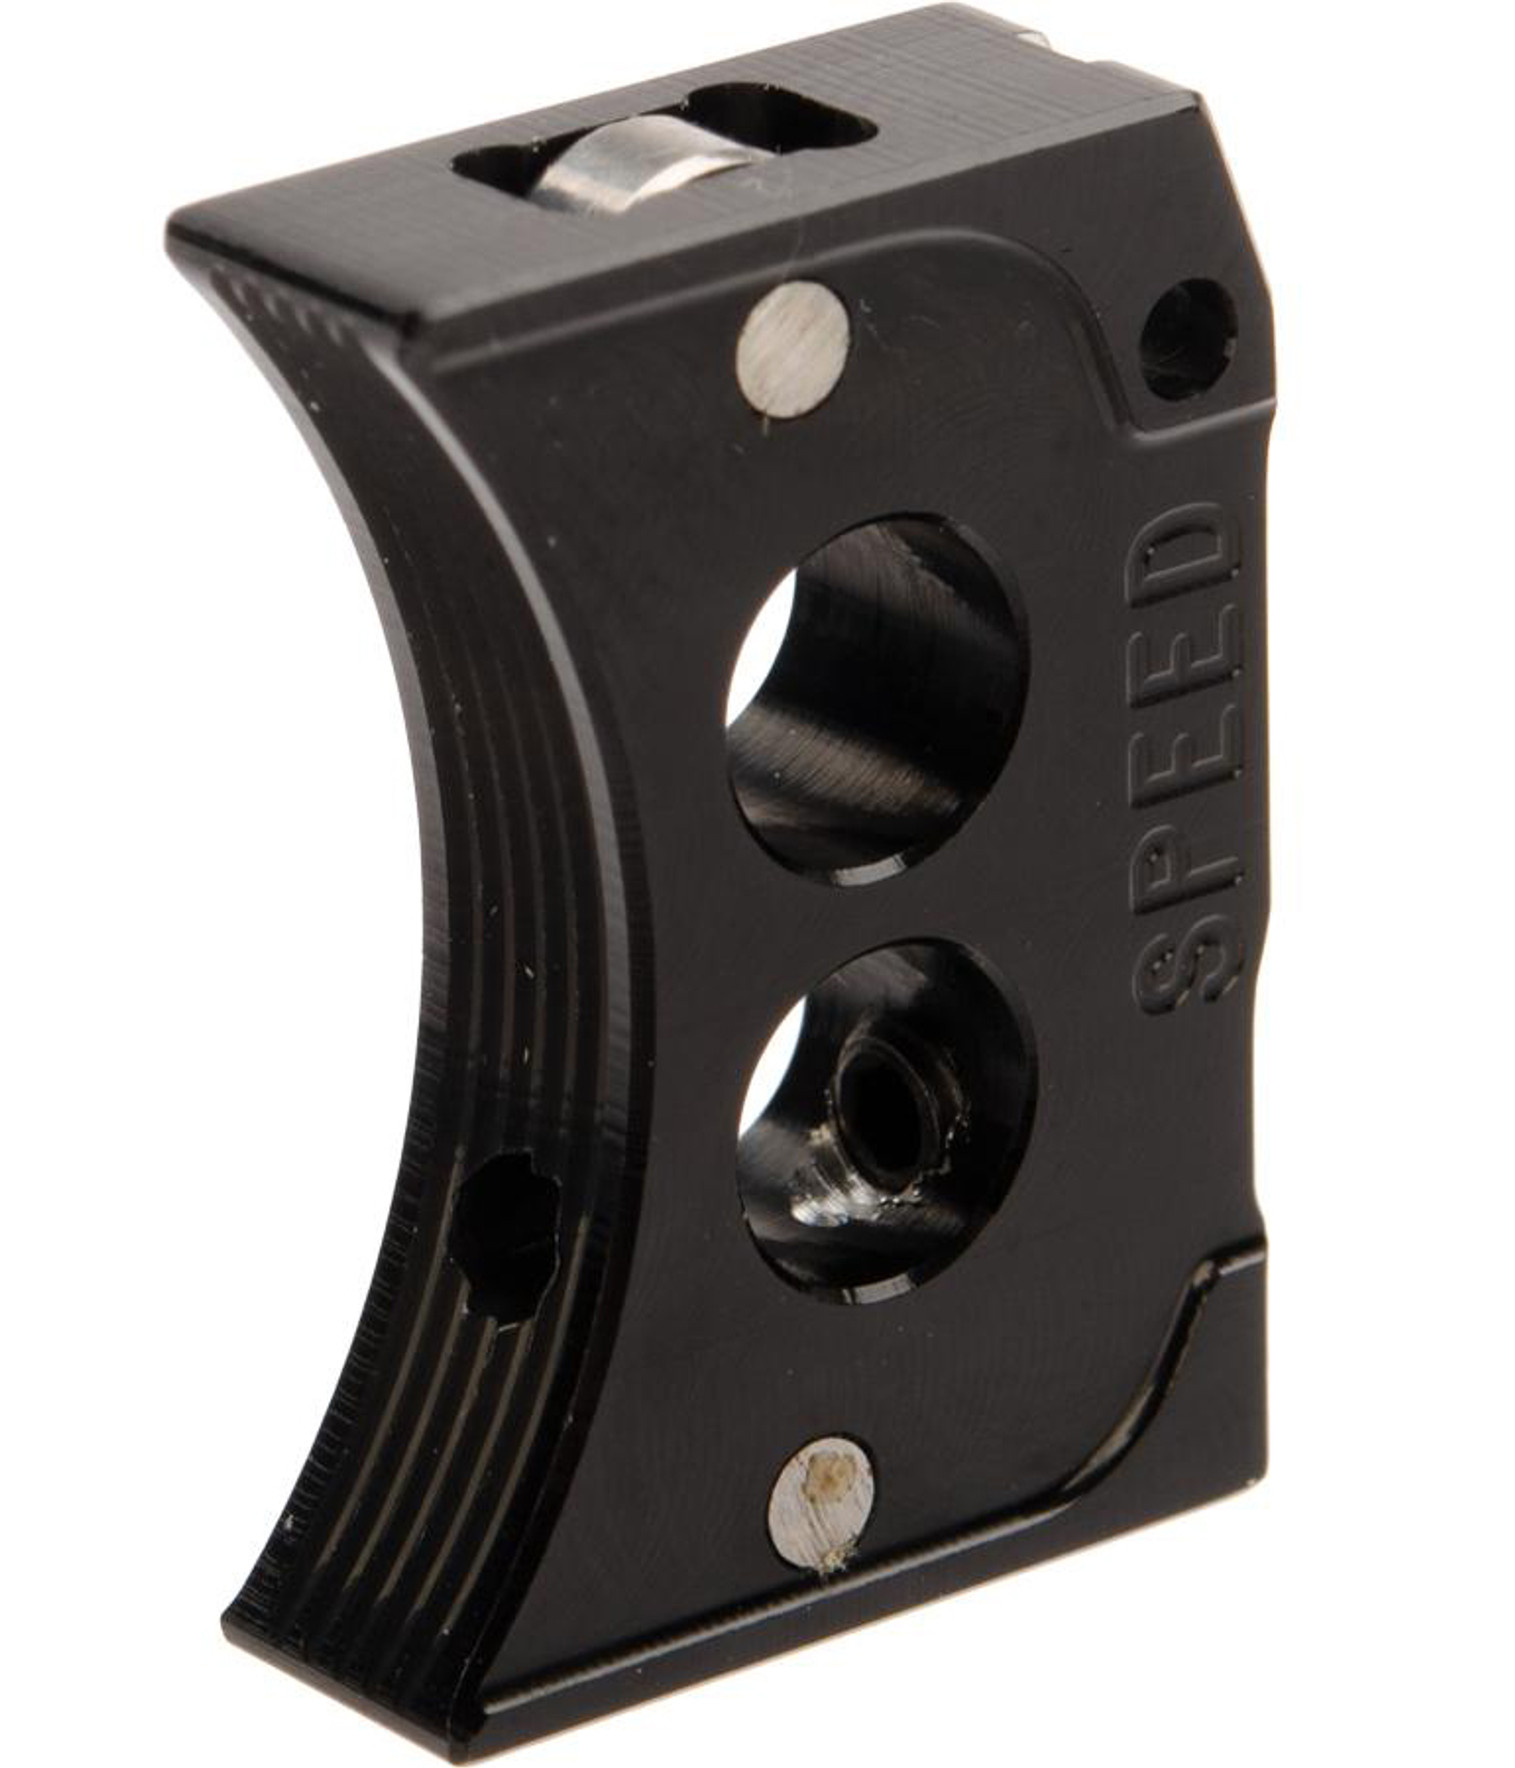 SPEED Ball Bearing Trigger for Tokyo Marui Hi-Capa/M1911 Airsoft Gas Blowback Pistols (Type: Curve Trigger / 2 Hole)